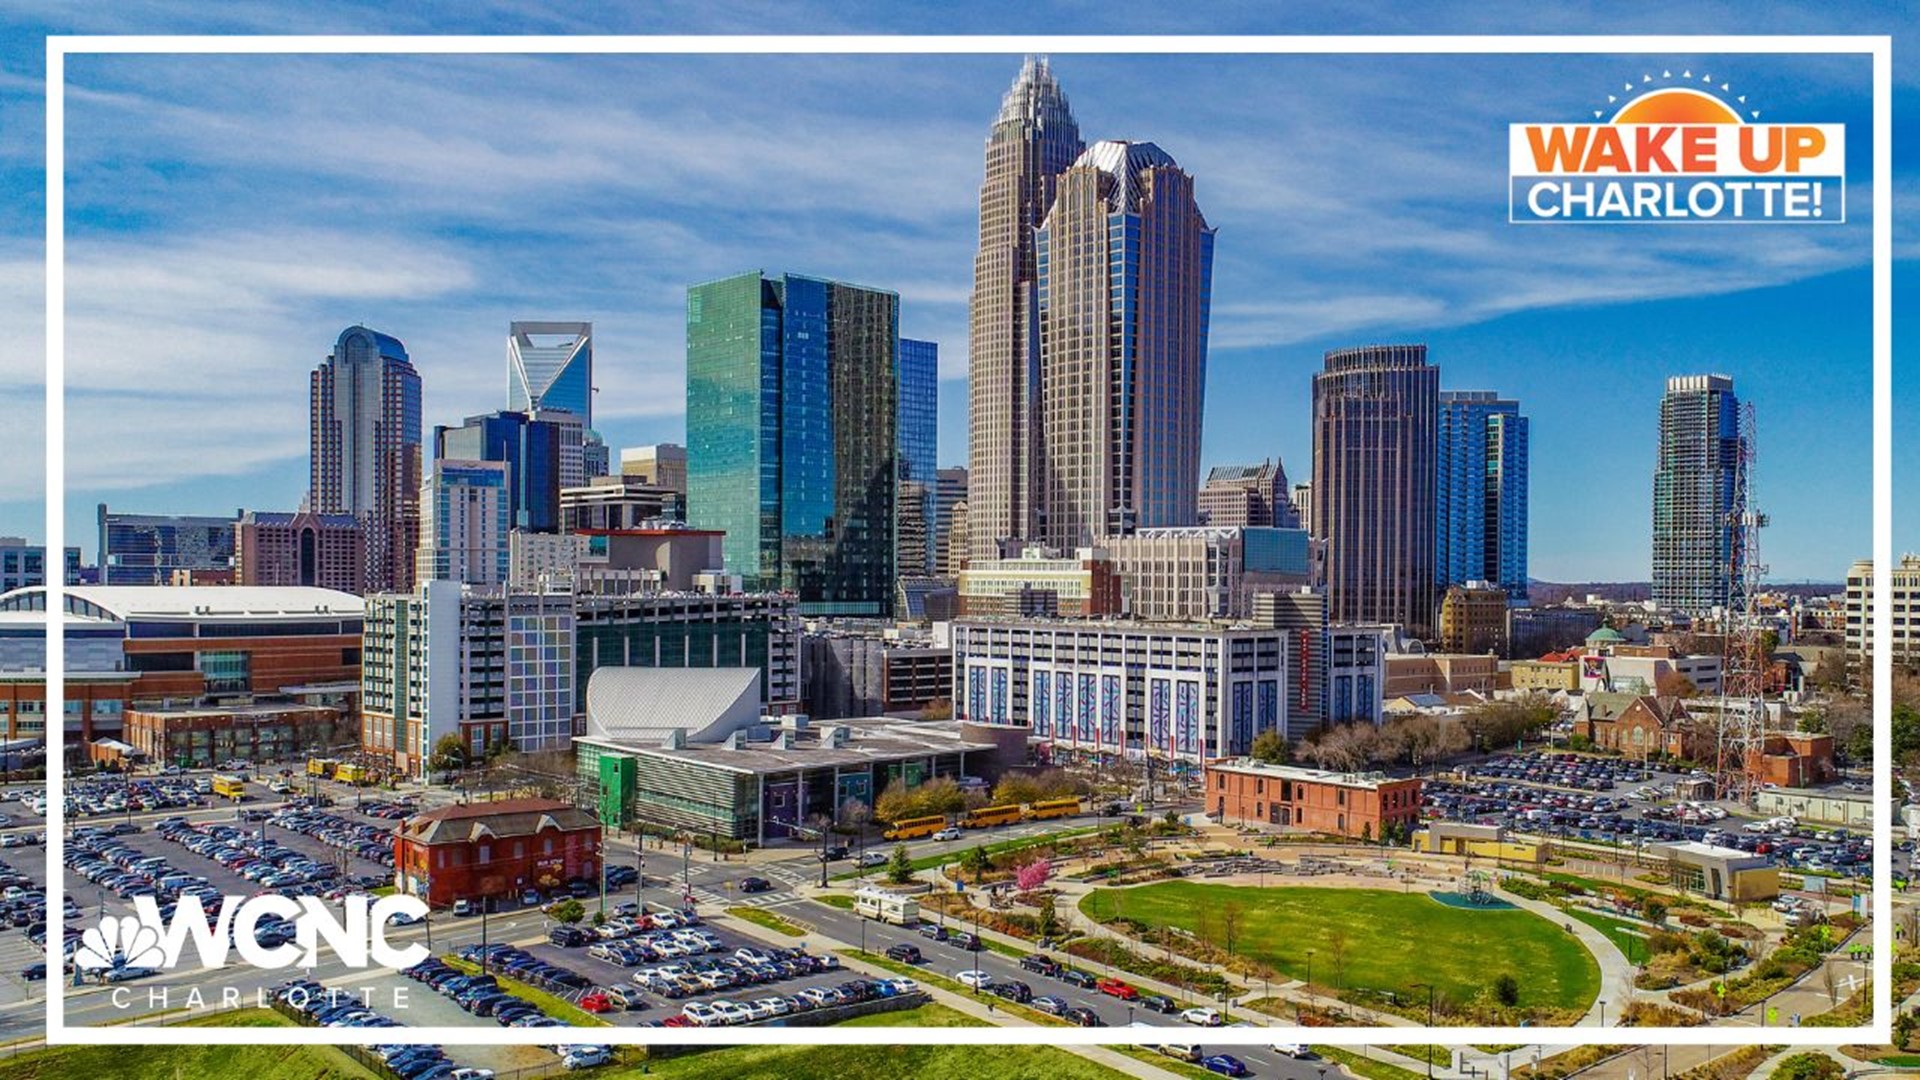 Forbes recently released its list of the richest U.S. cities. Driven by home ownership data, here's how things stack up in the Carolinas.